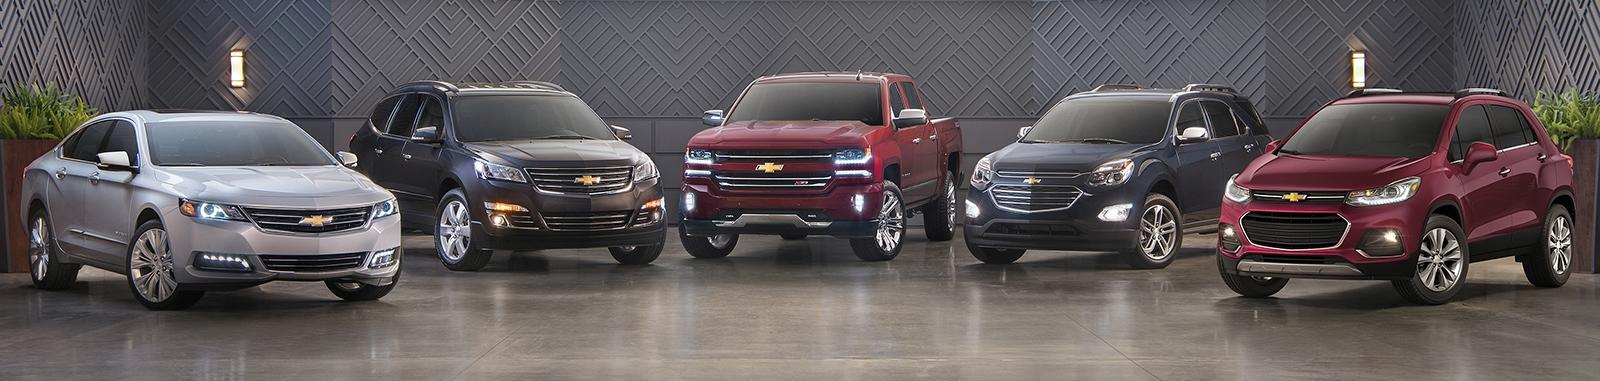 Chevrolet 2020 Models First-Time Car Buyers Need to Know About